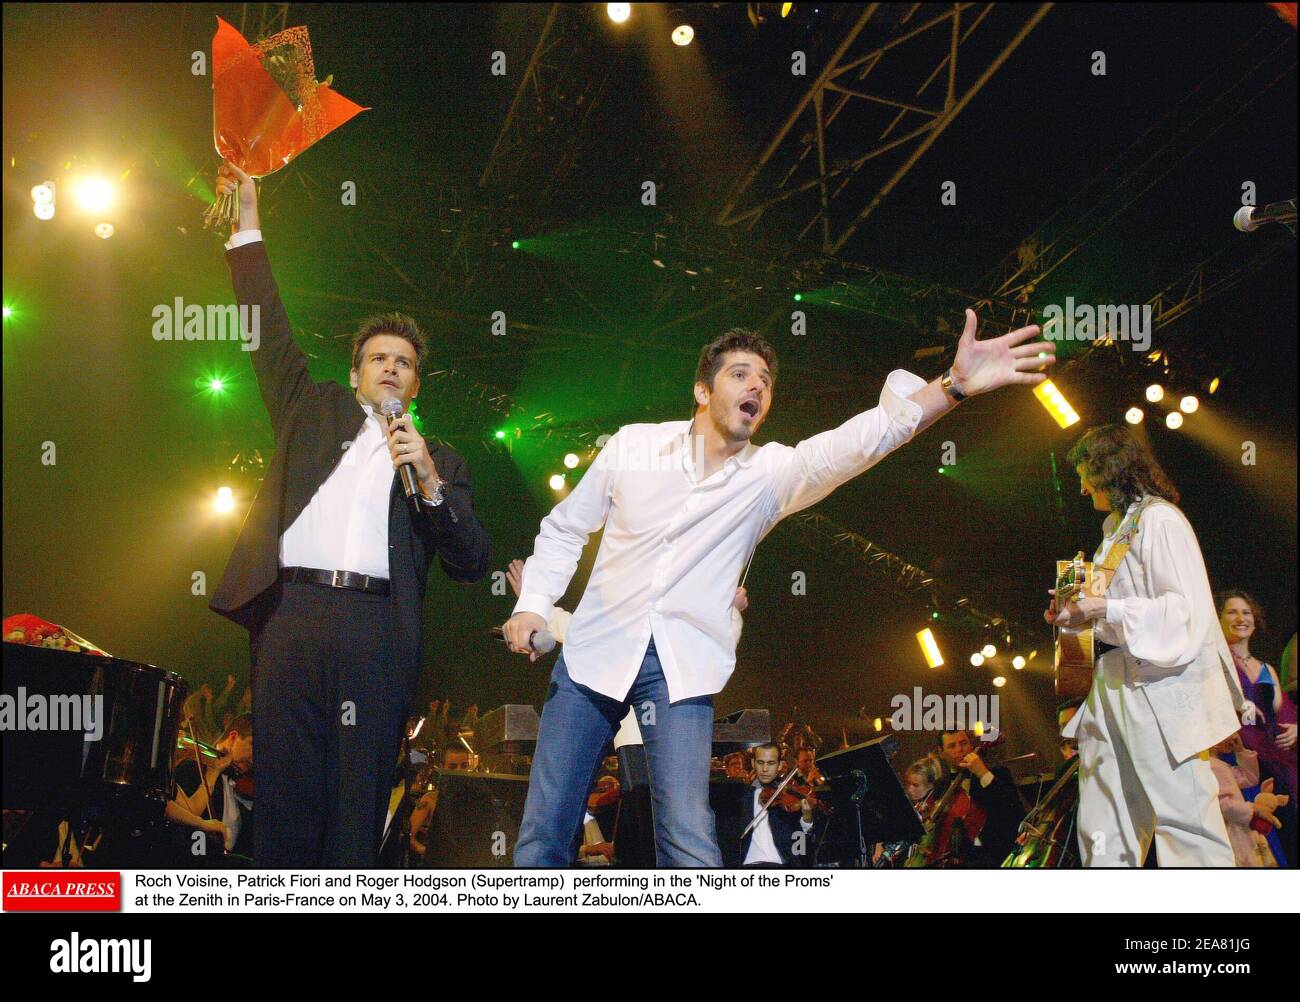 Roch Voisine, Patrick Fiori and Roger Hodgson (Supertramp) performing in the 'Night of the Proms' at the Zenith in Paris-France on May 3, 2004. Photo by Laurent Zabulon/ABACA. Stock Photo